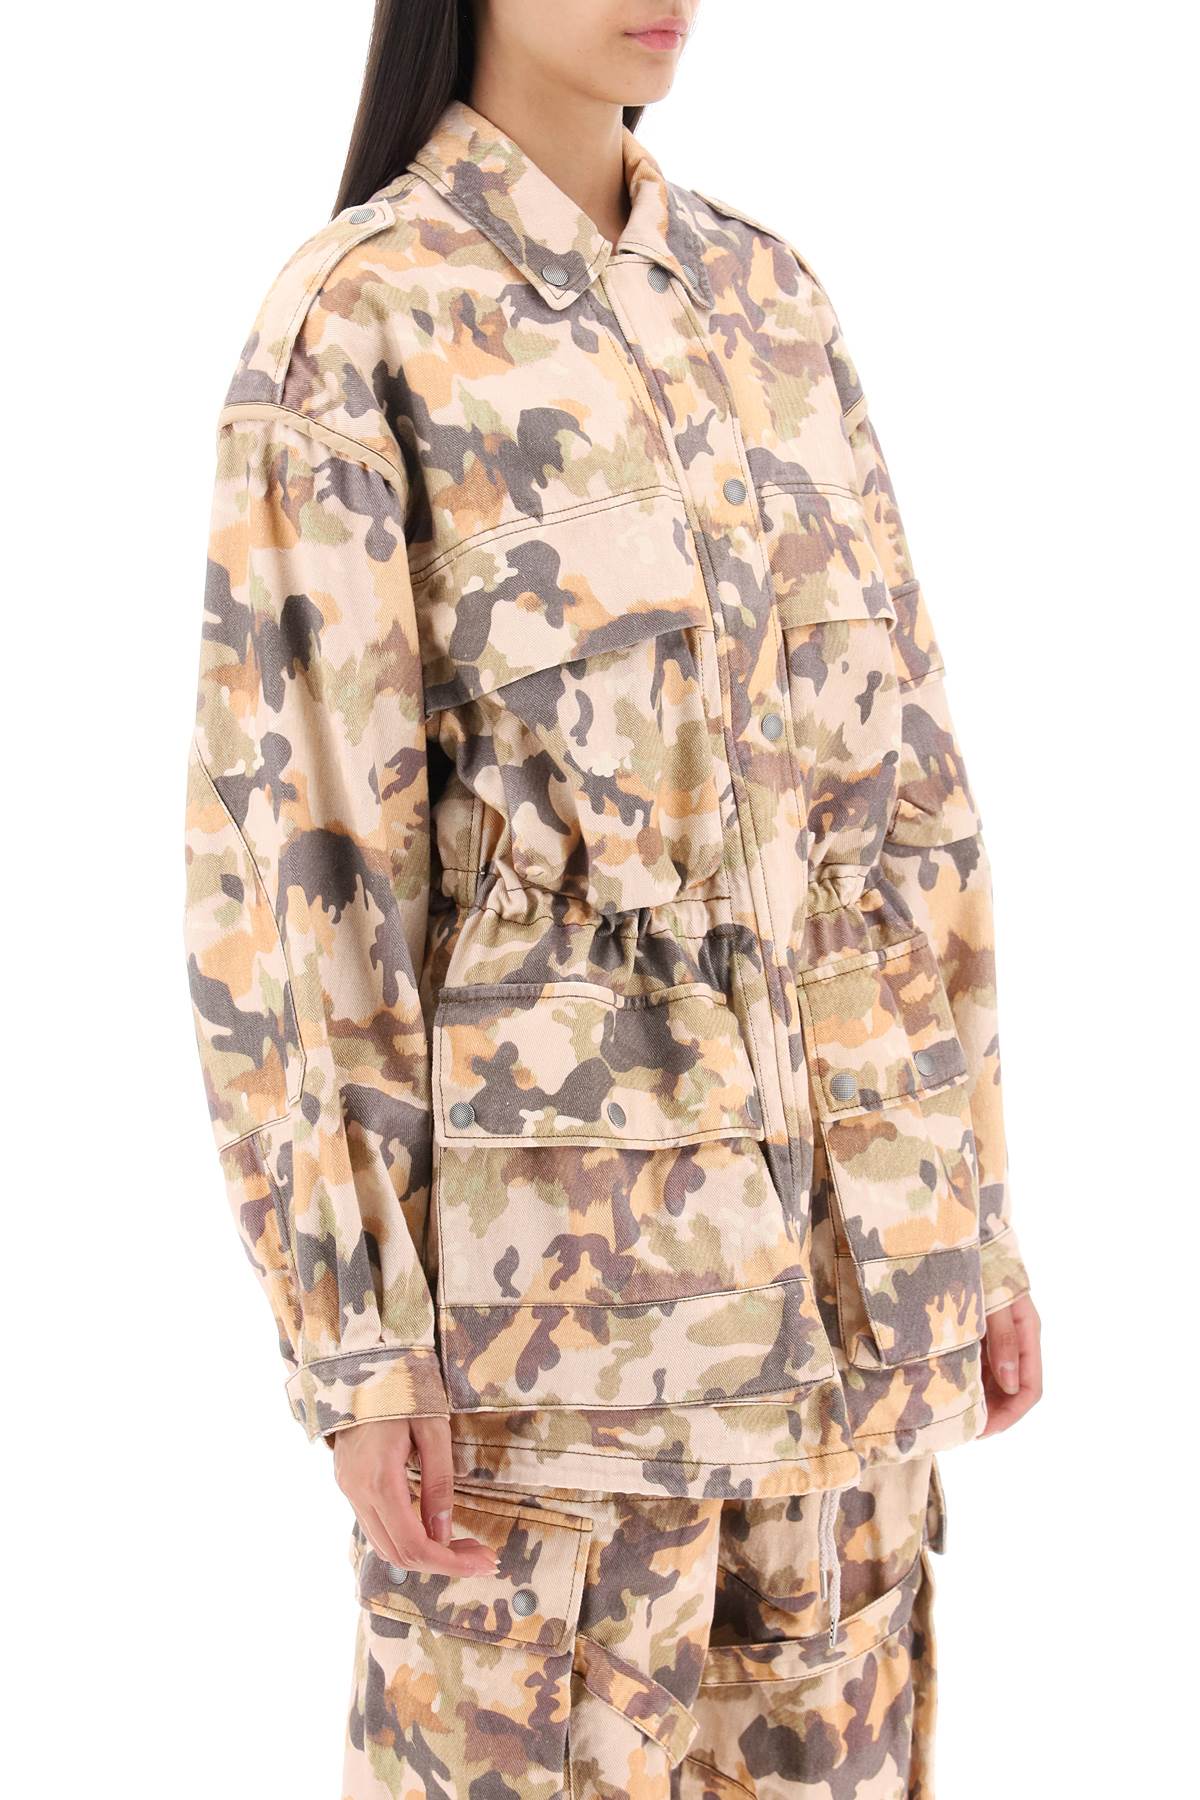 ISABEL MARANT Camouflage Cotton Jacket with Cargo-Inspired Design for Women - SS23 Collection